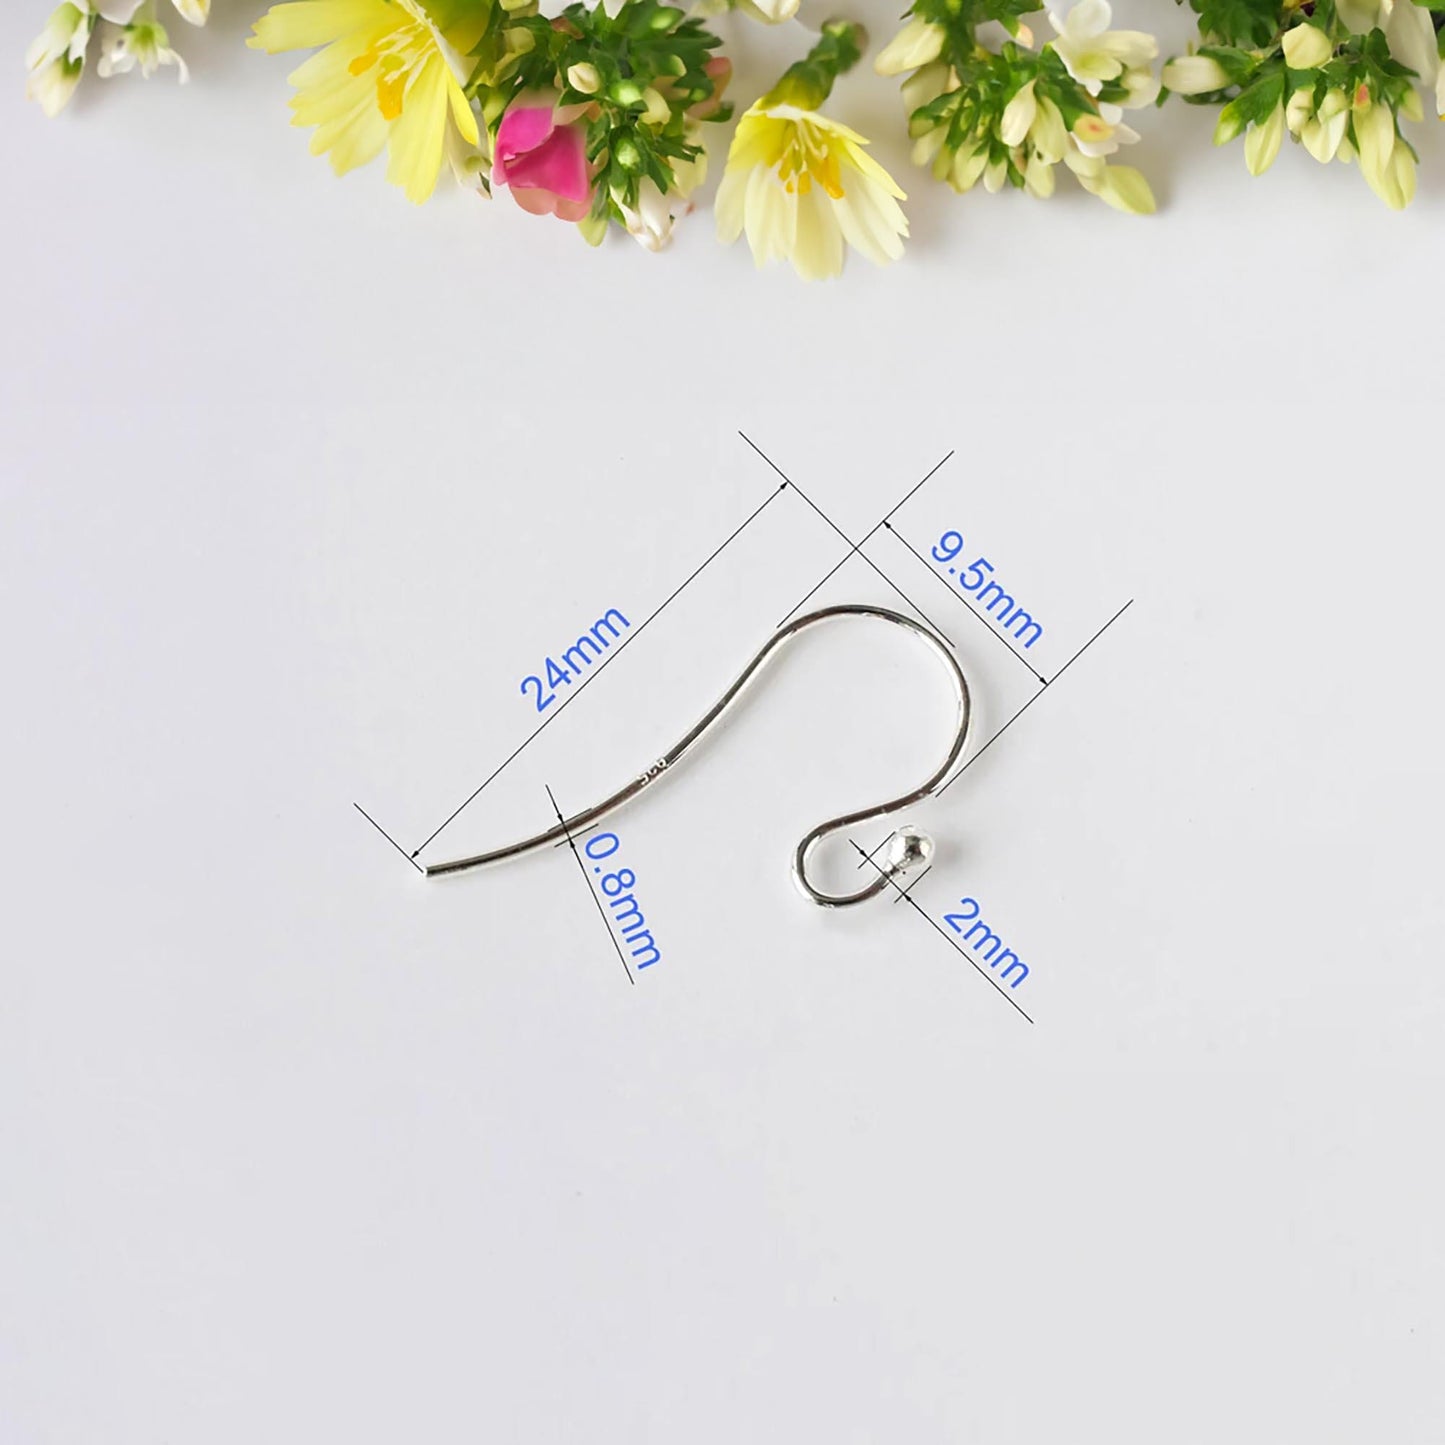 French Hooks Earring Wires 925 Sterling Silver Earring Hooks Wholesale Earring Findings 7mm Earring Hooks Hypoallergenic Ear Wires Ball End